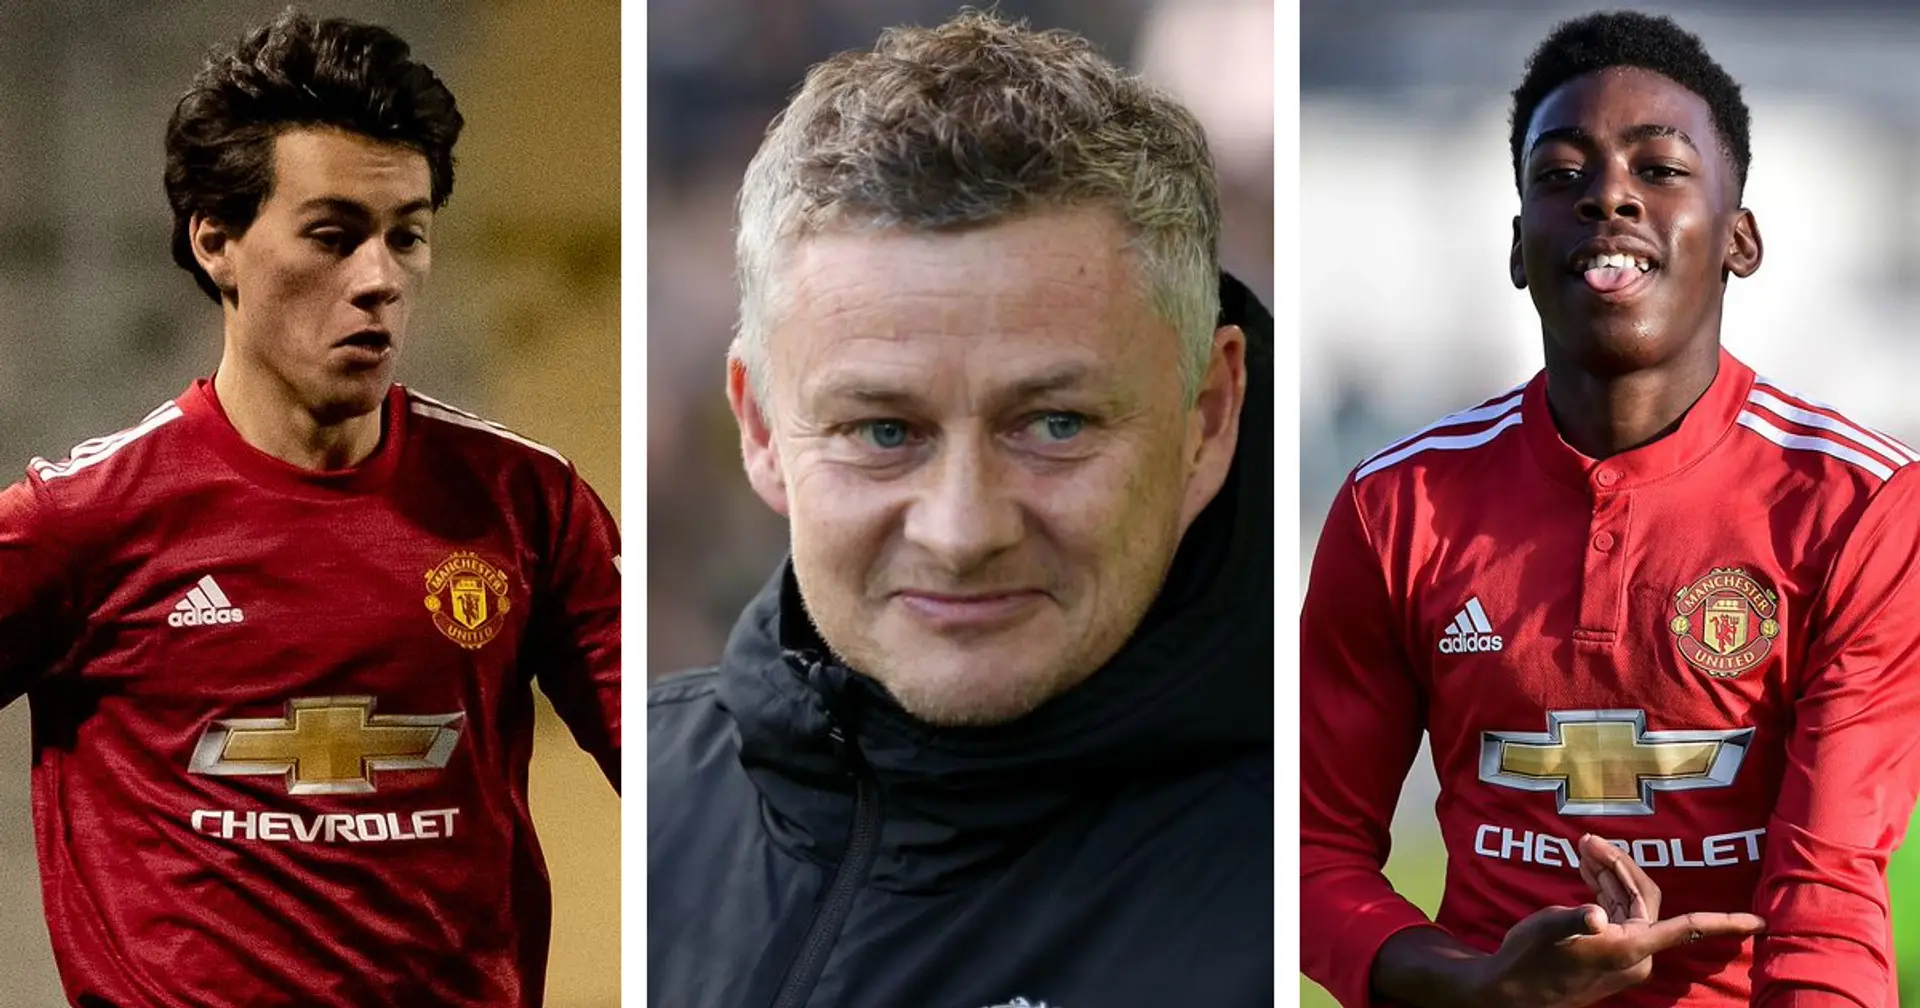 Next gen stars: 5 Man United Academy players promoted to first-team squad ahead of Wolves fixture